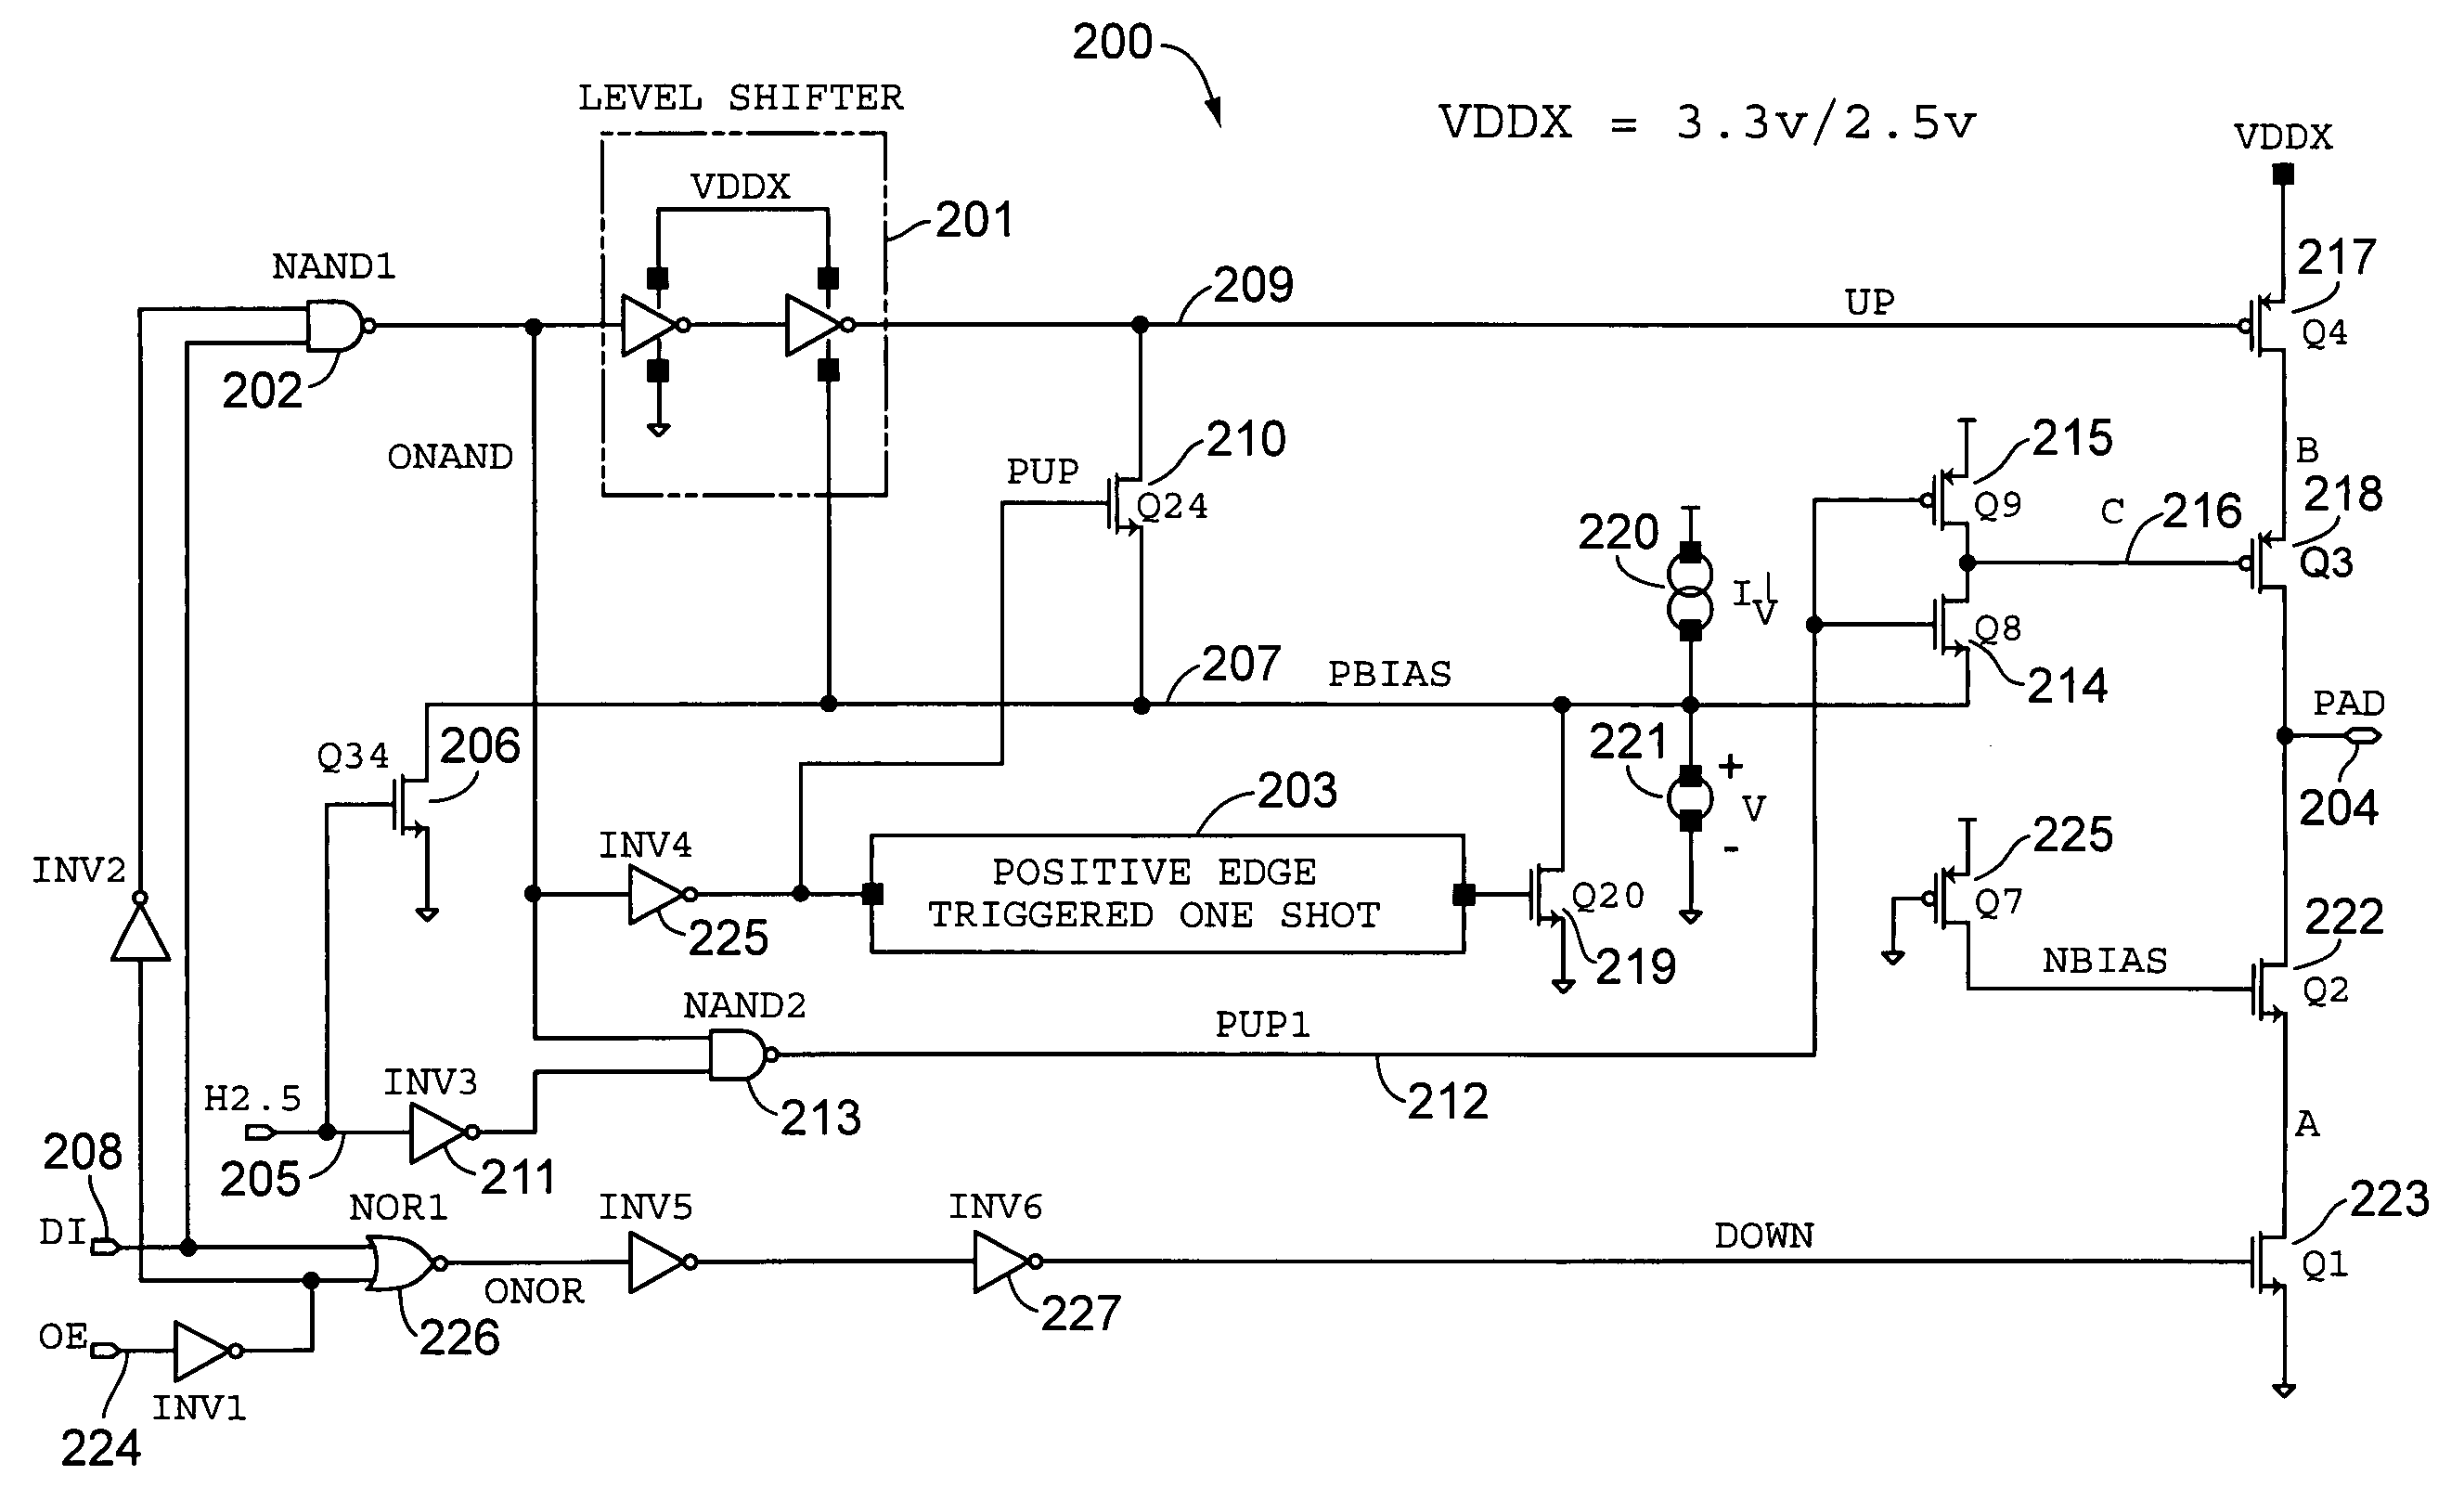 Output drive circuit that accommodates variable supply voltages